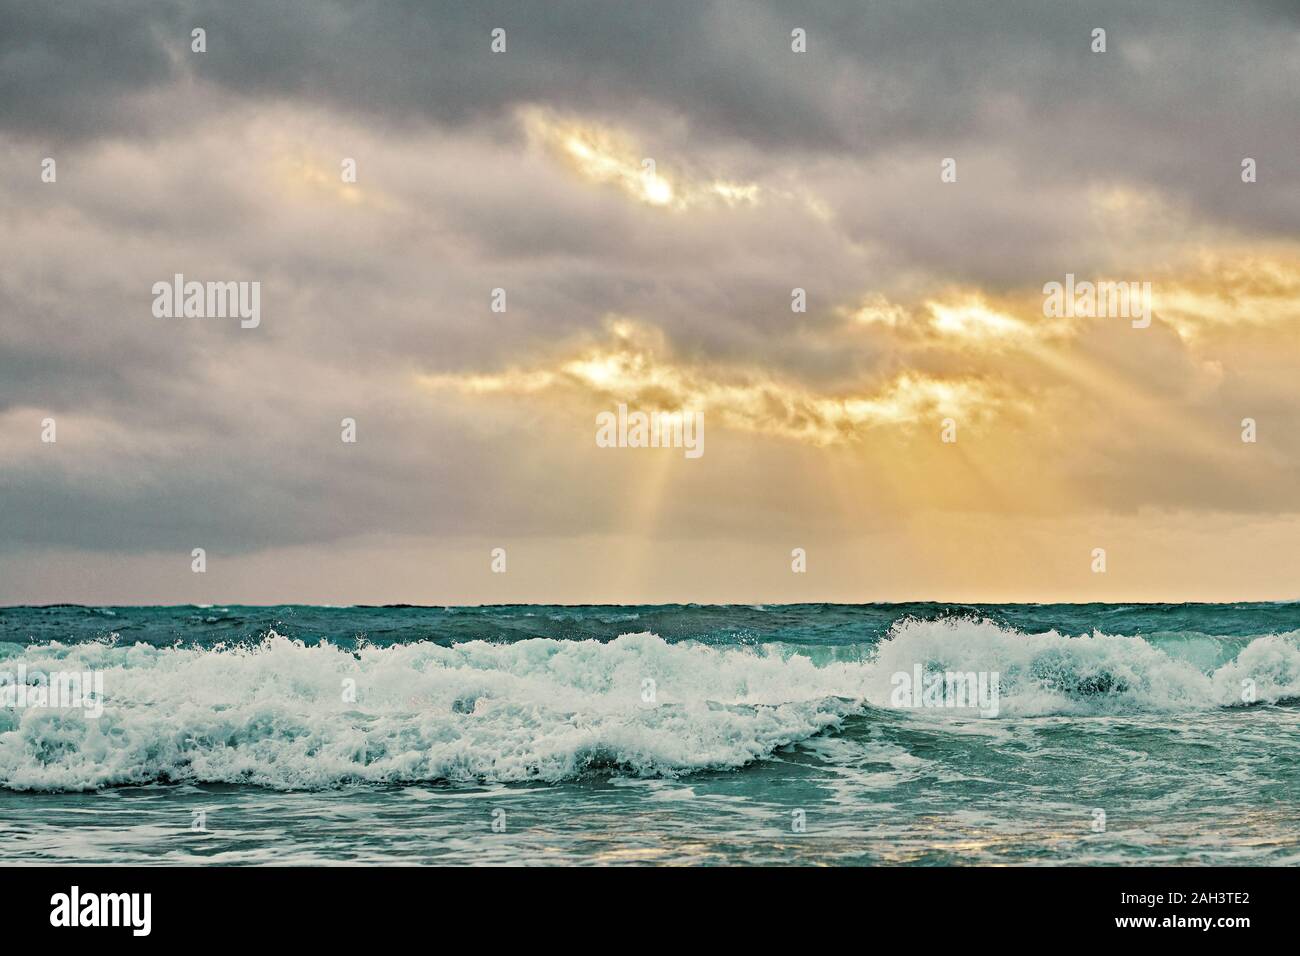 Sunset scenery of the sea along the White Beach of Boracay Island, Philippines. The sea is rougher with Habagat wind blowing during the rainy season. Stock Photo